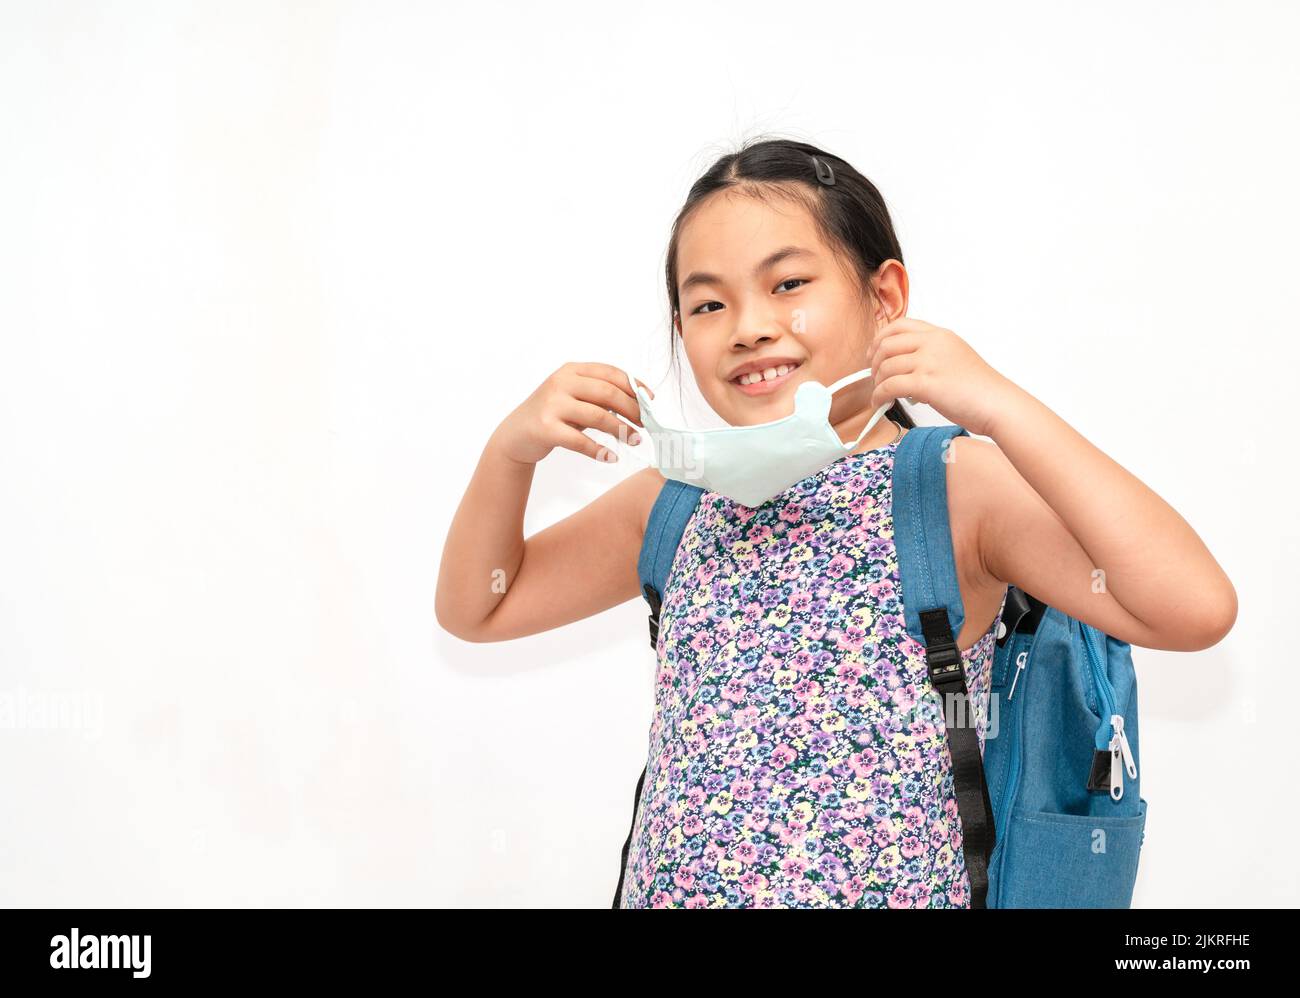 Portrait Asian child girl is holding and willing to wear a facemask, carrying a backpack to go to school, isolated portrait image on white background. Stock Photo